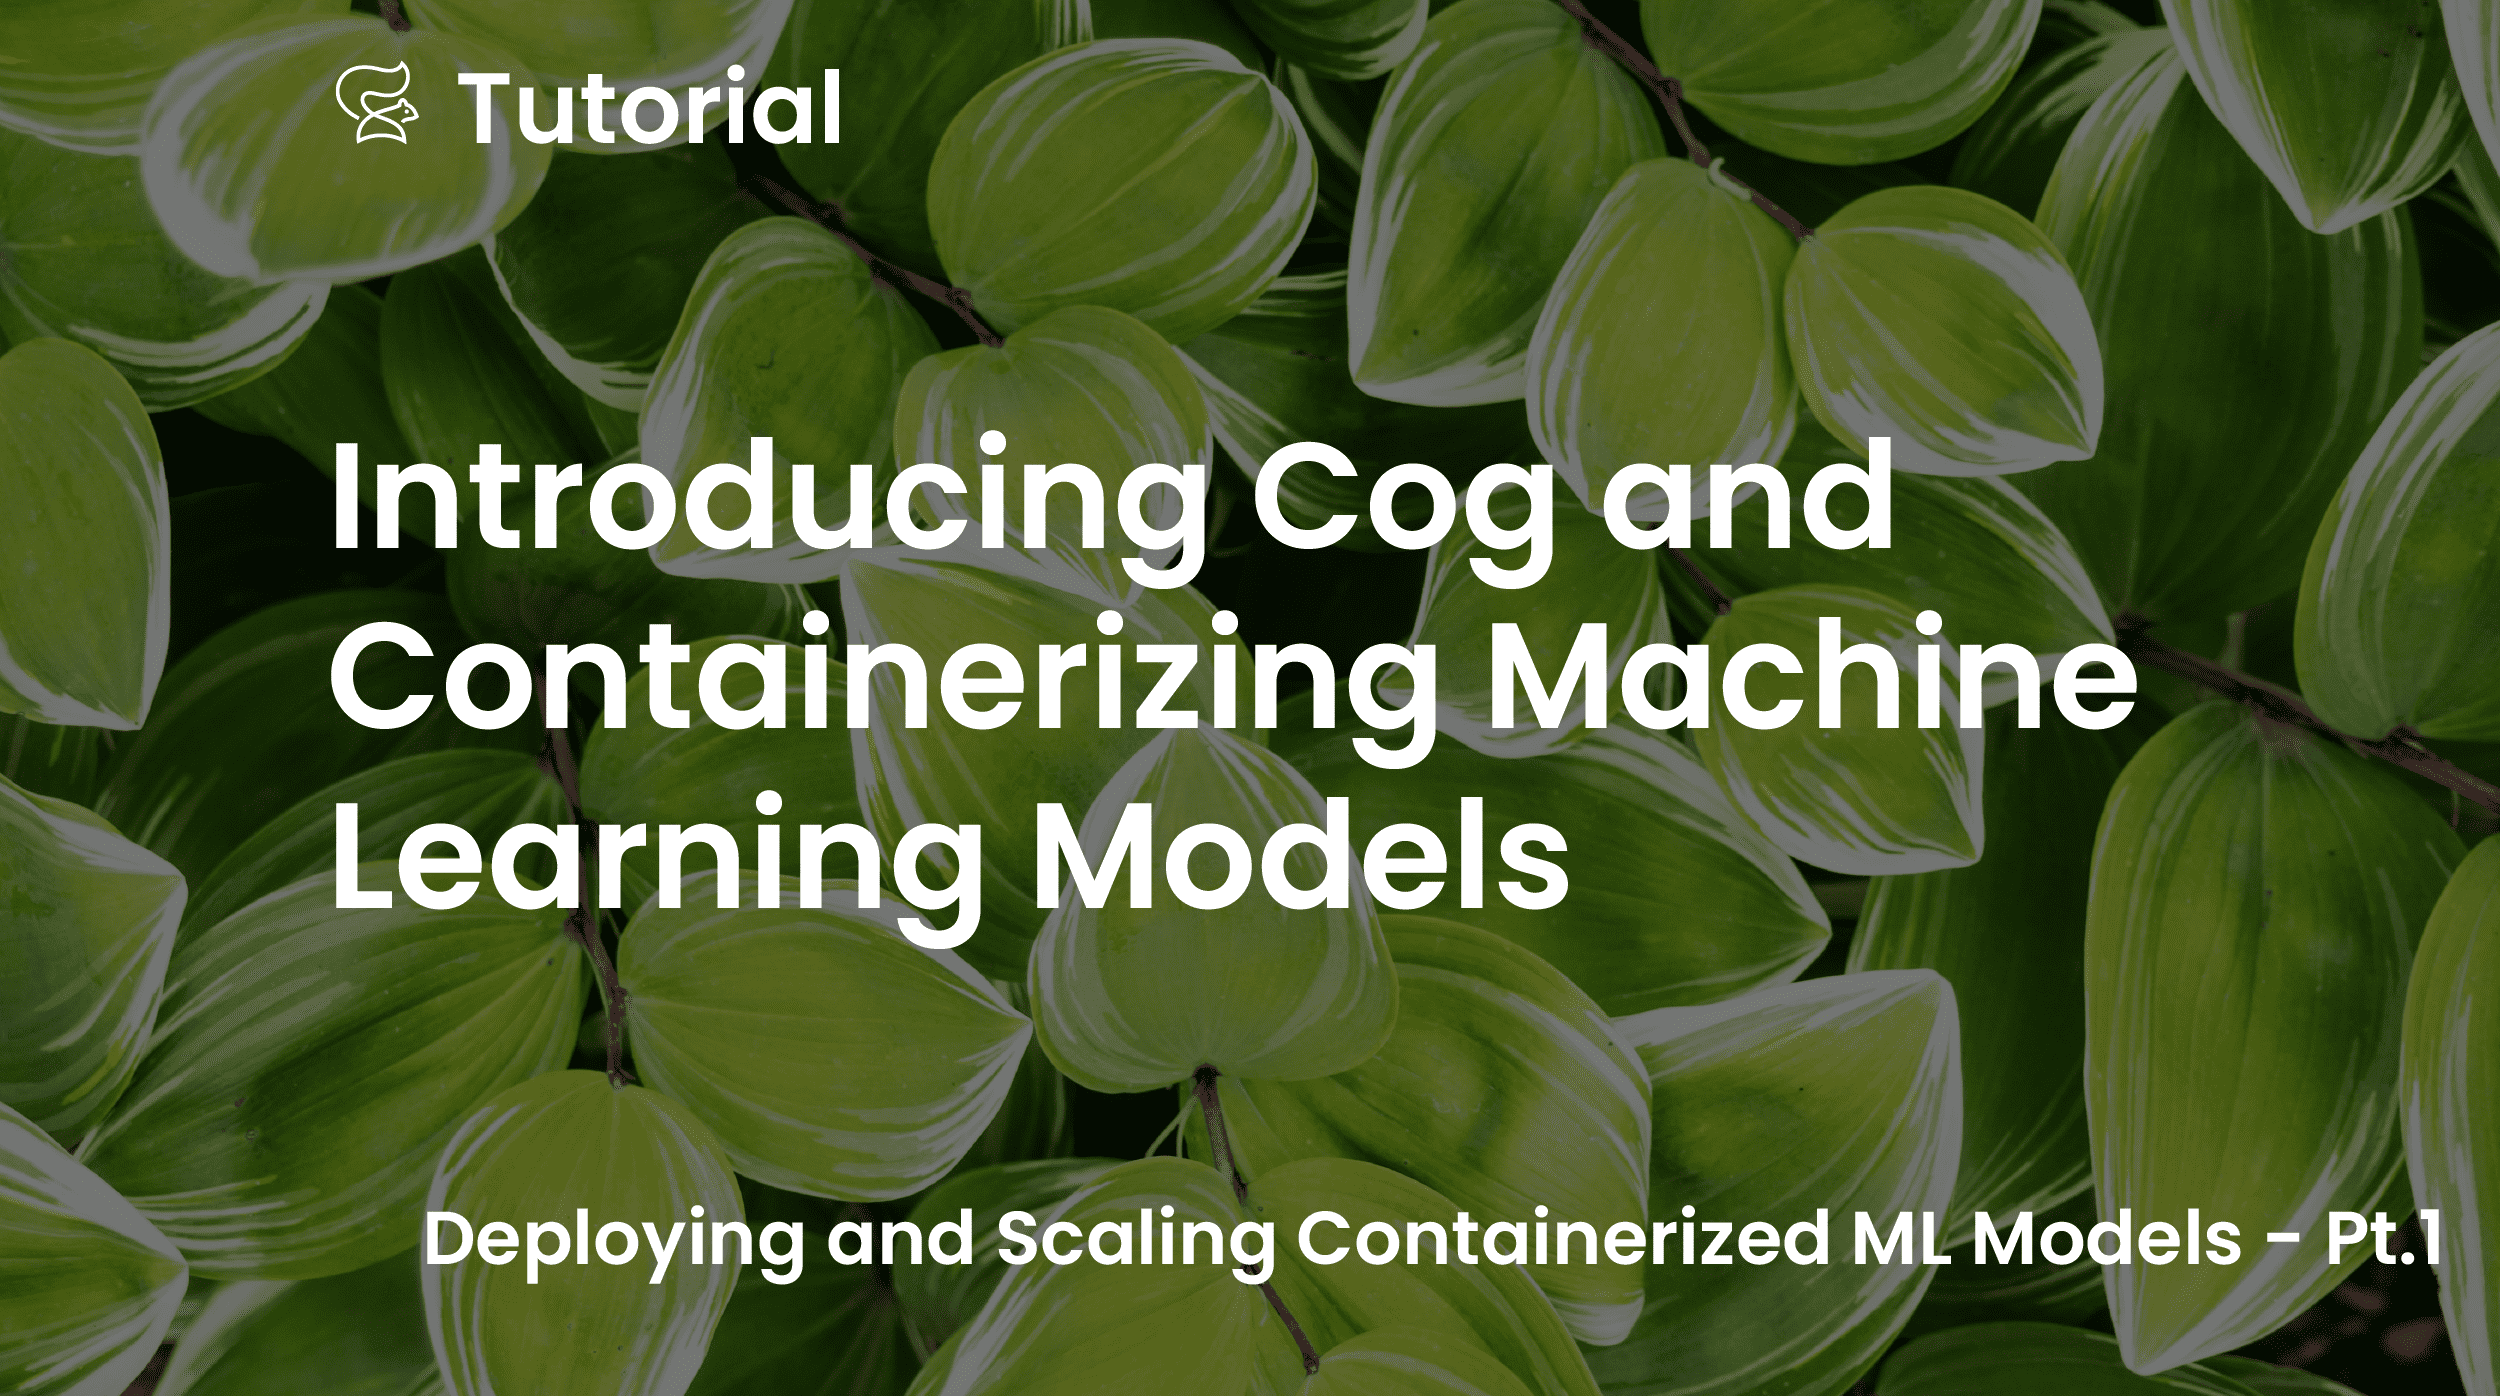 Introducing Cog and Containerizing Machine Learning Models